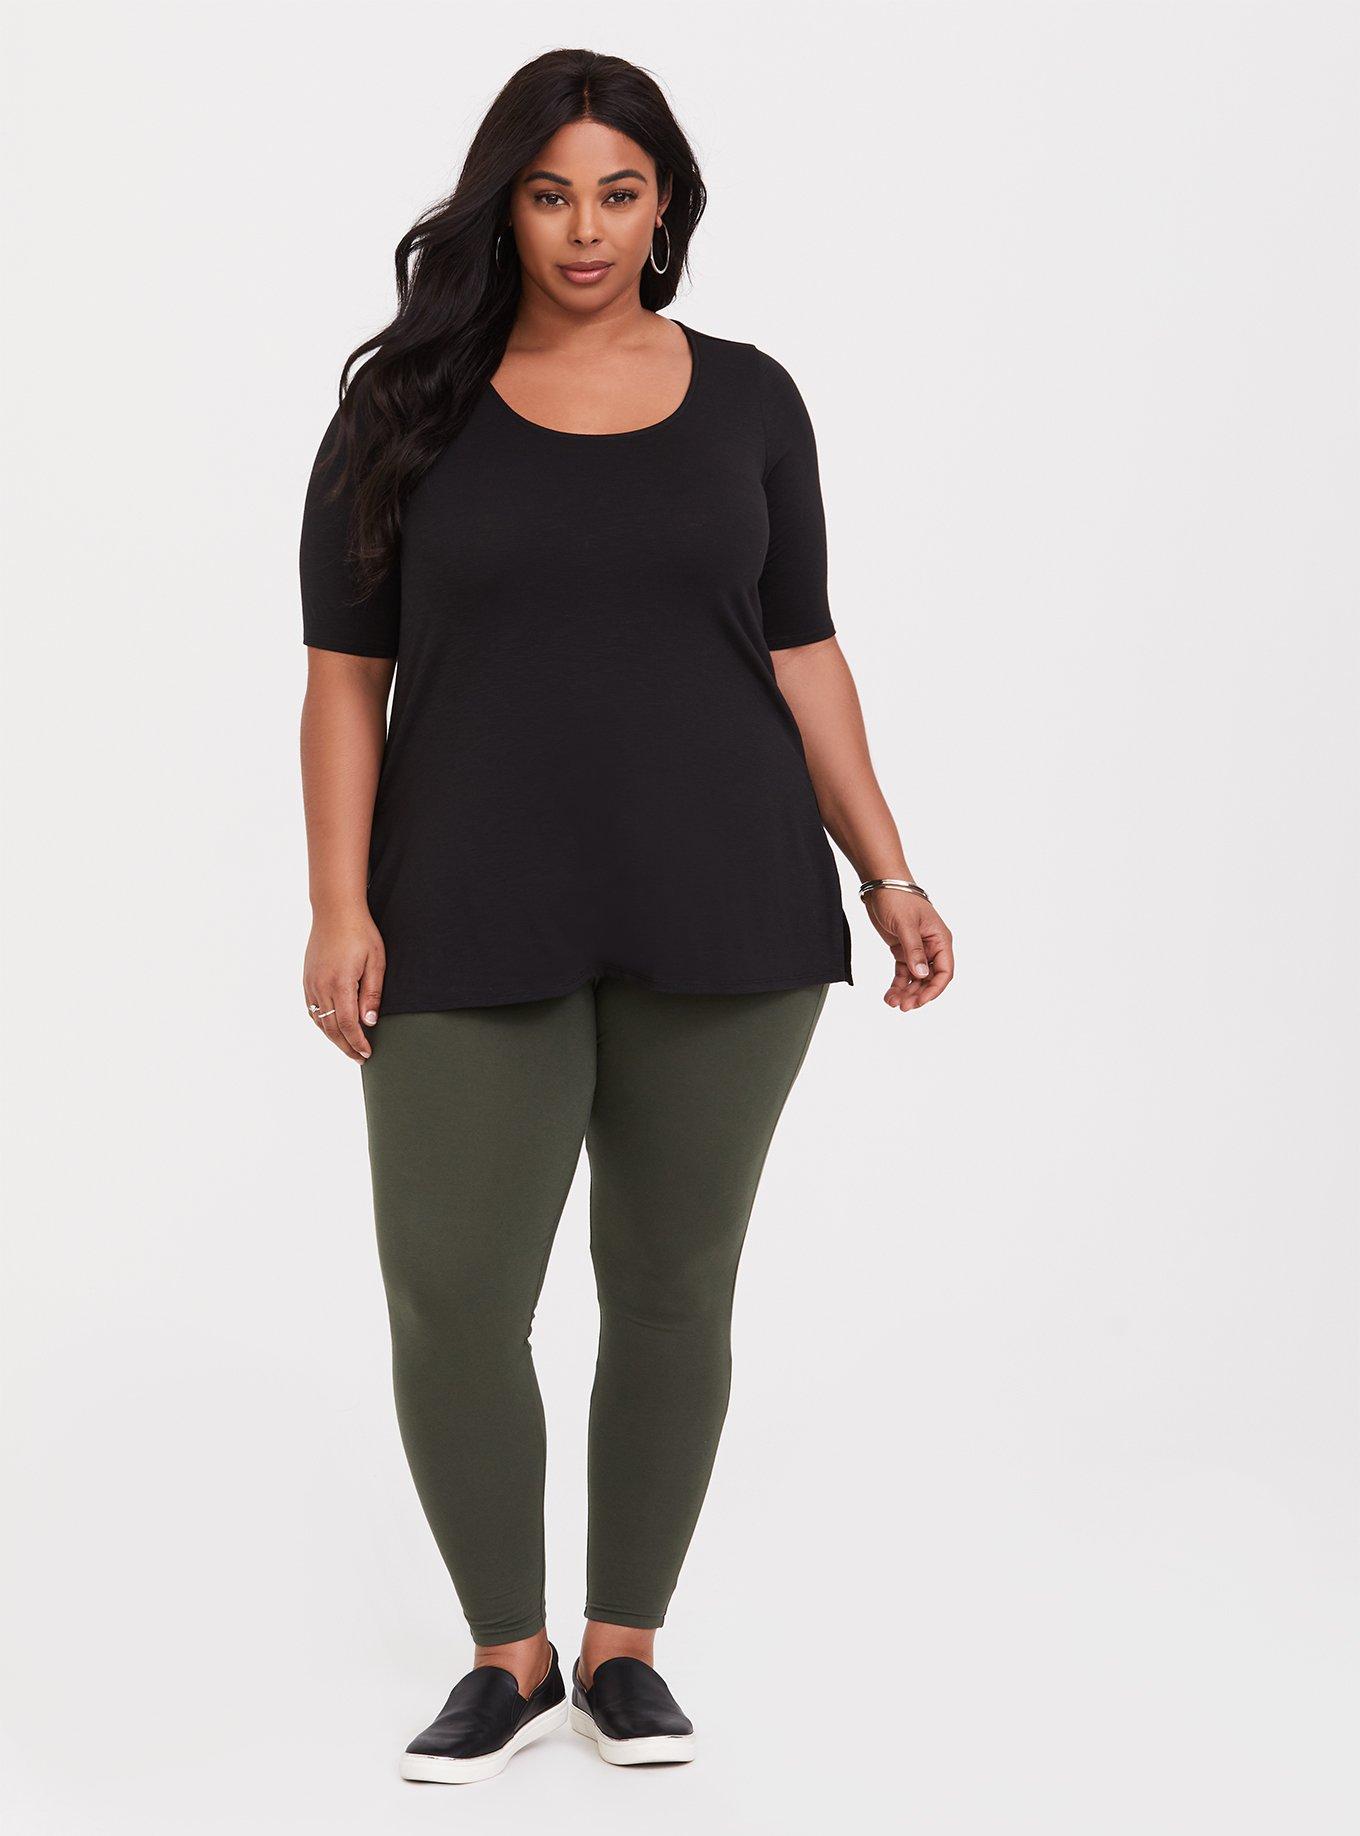 Anyone Know When These Gold Leggings Will Be Online? : r/torrid